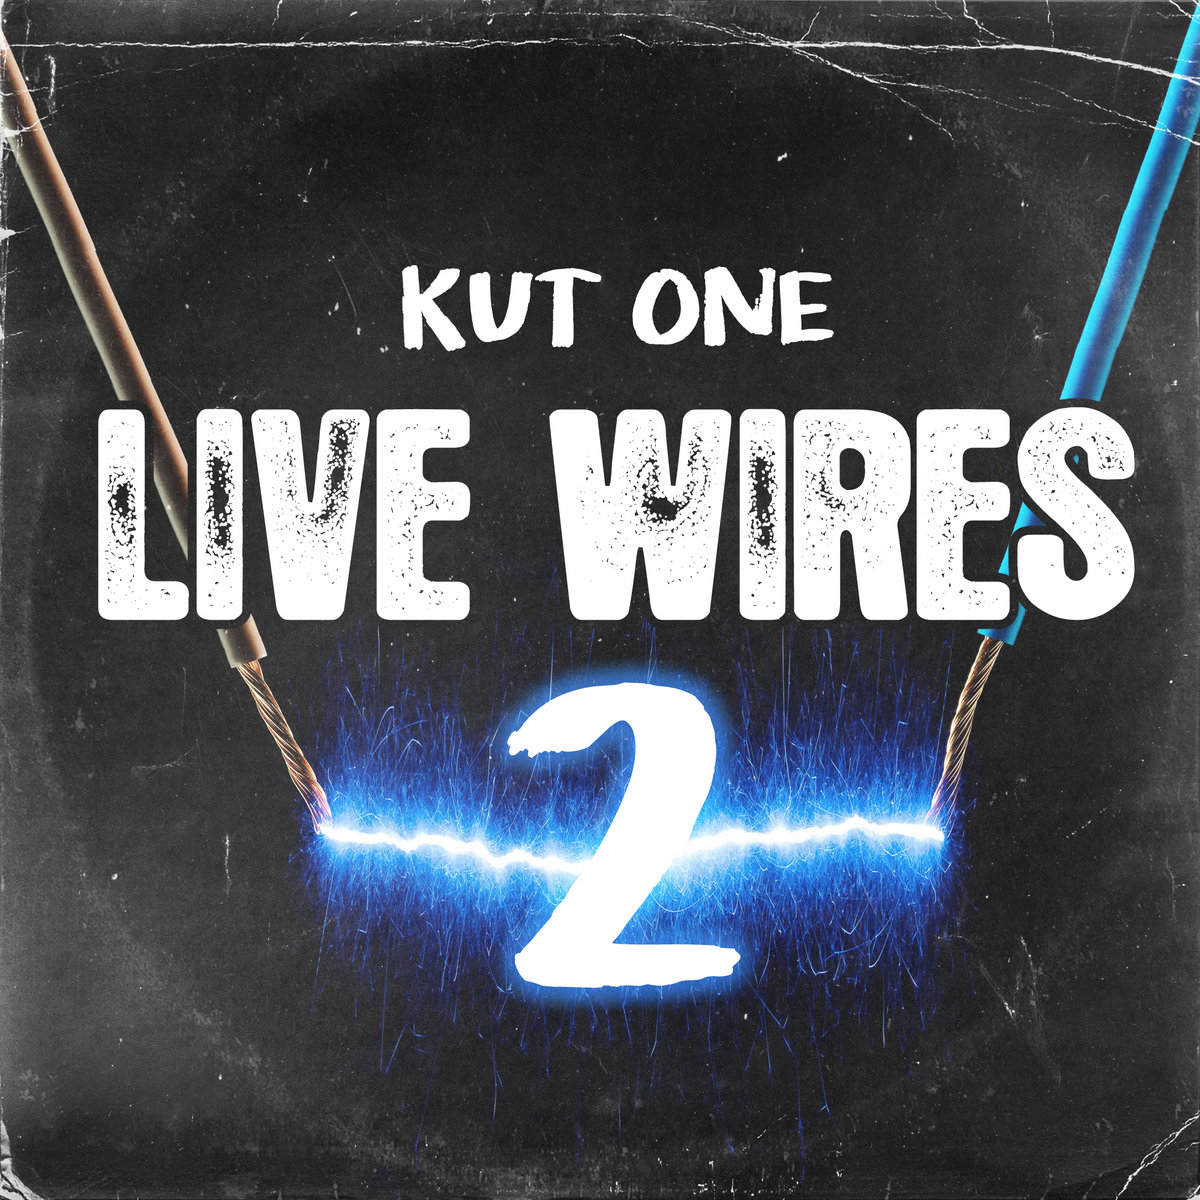 Live_wires_2_kut_one